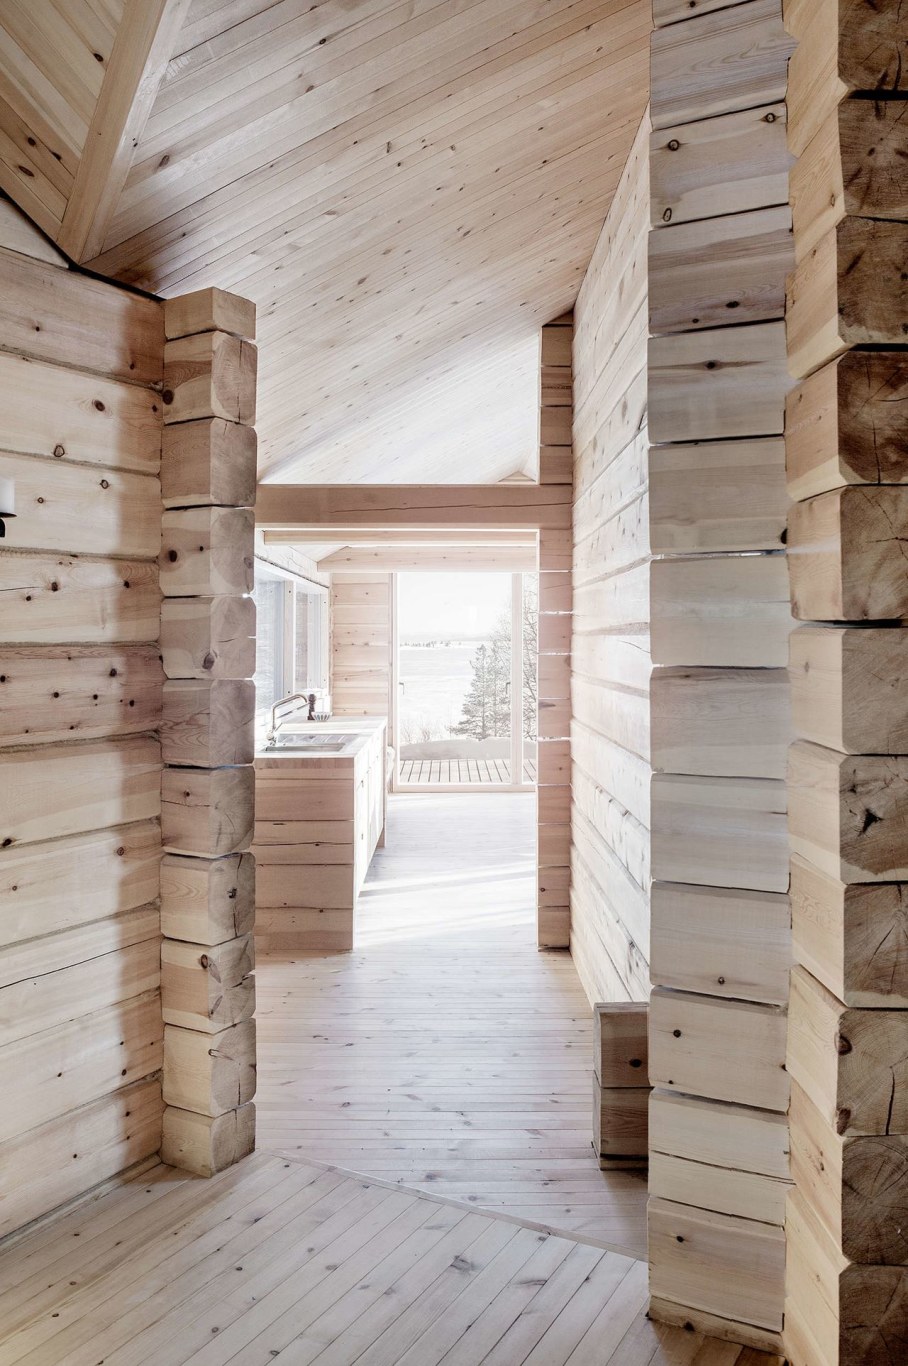 The wooden house in Norway - interior 4